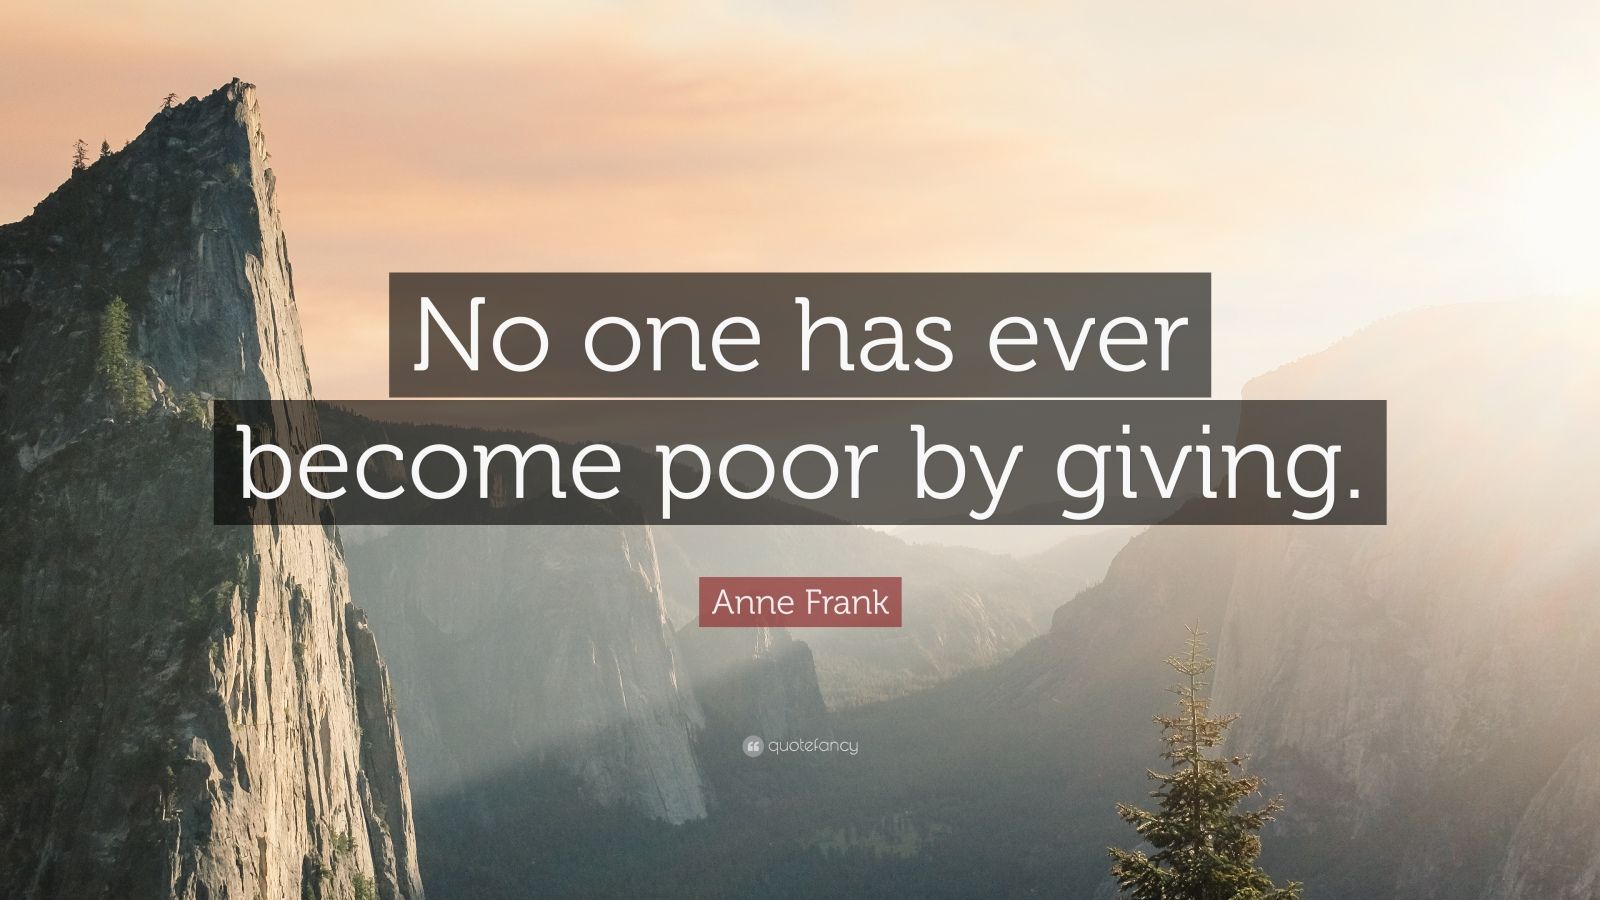 Anne Frank Quote “No one has ever poor by giving